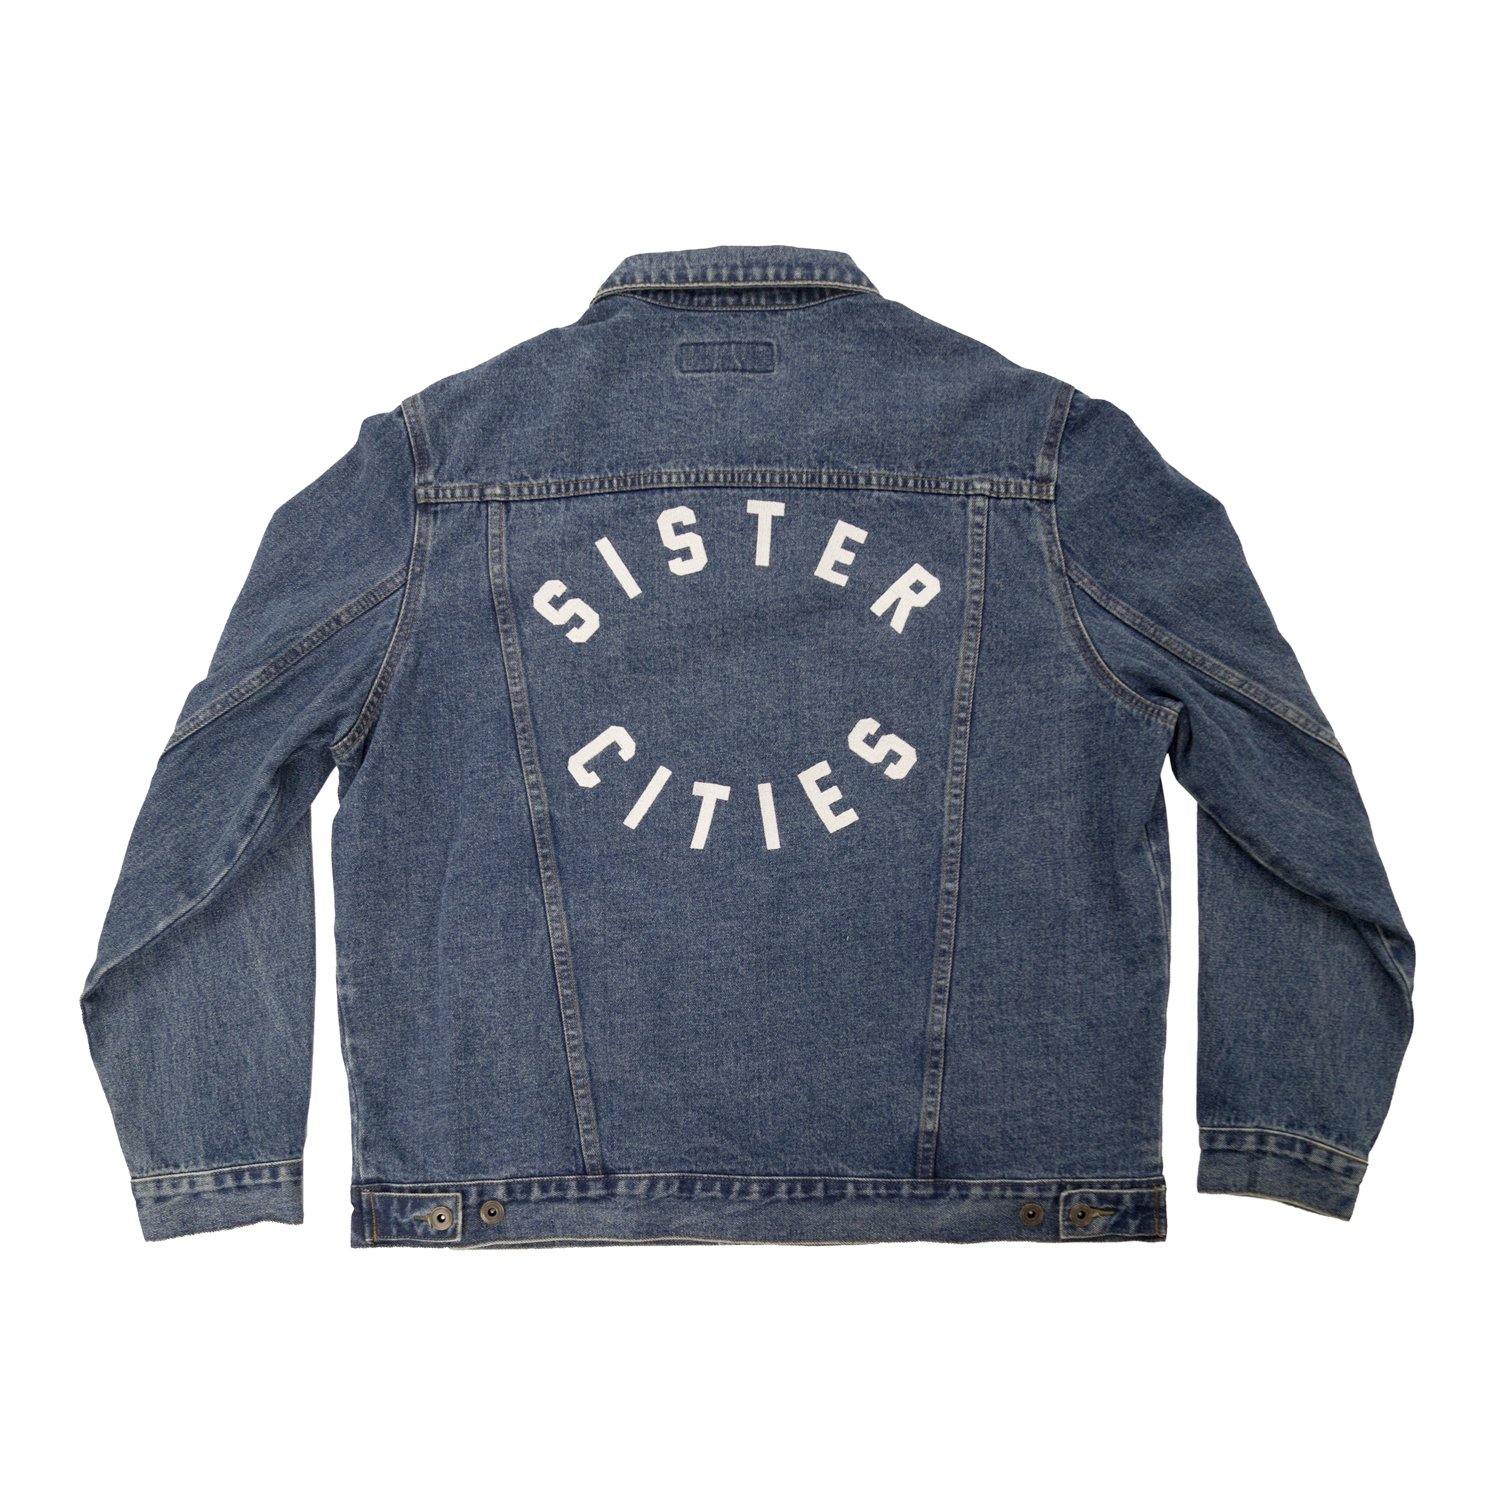 Buy – The Wonder Years "Sister Cities" Denim Jacket – Band & Music Merch – Cold Cuts Merch